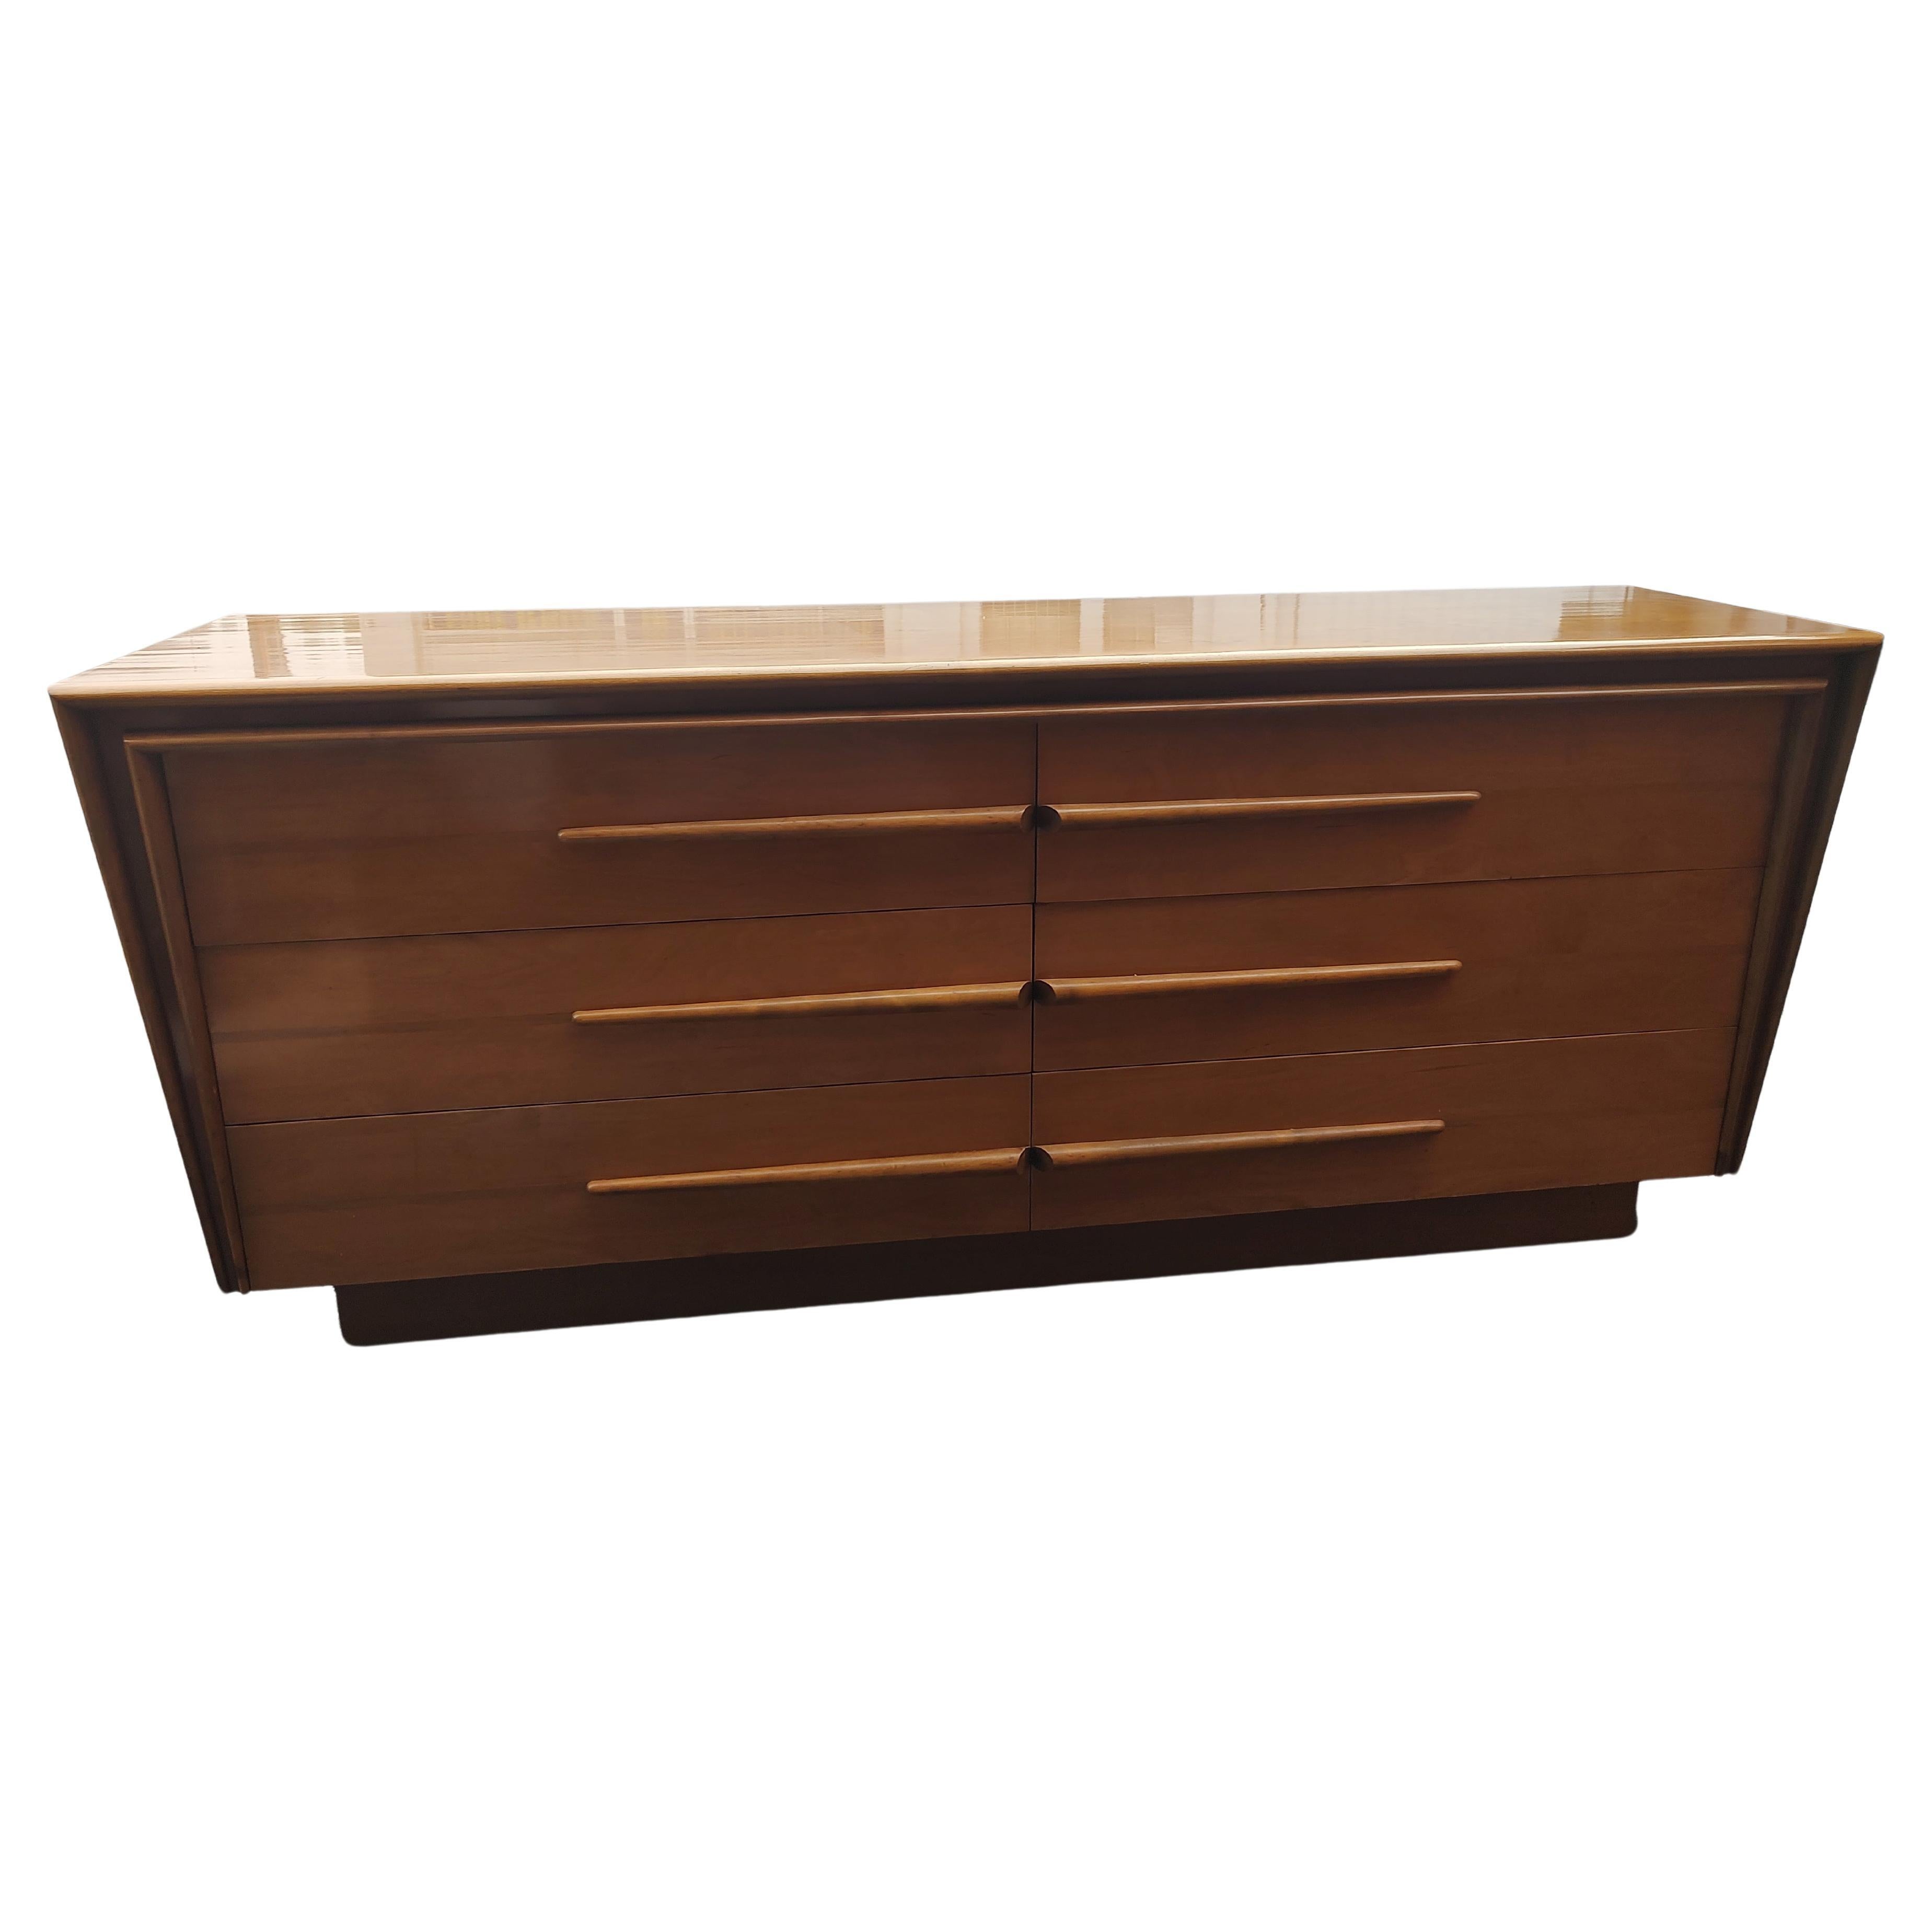 Mid Century Modern Sculptural Birch 6 Drawer Dresser by Edmond Spence Sweden  In Good Condition For Sale In Port Jervis, NY